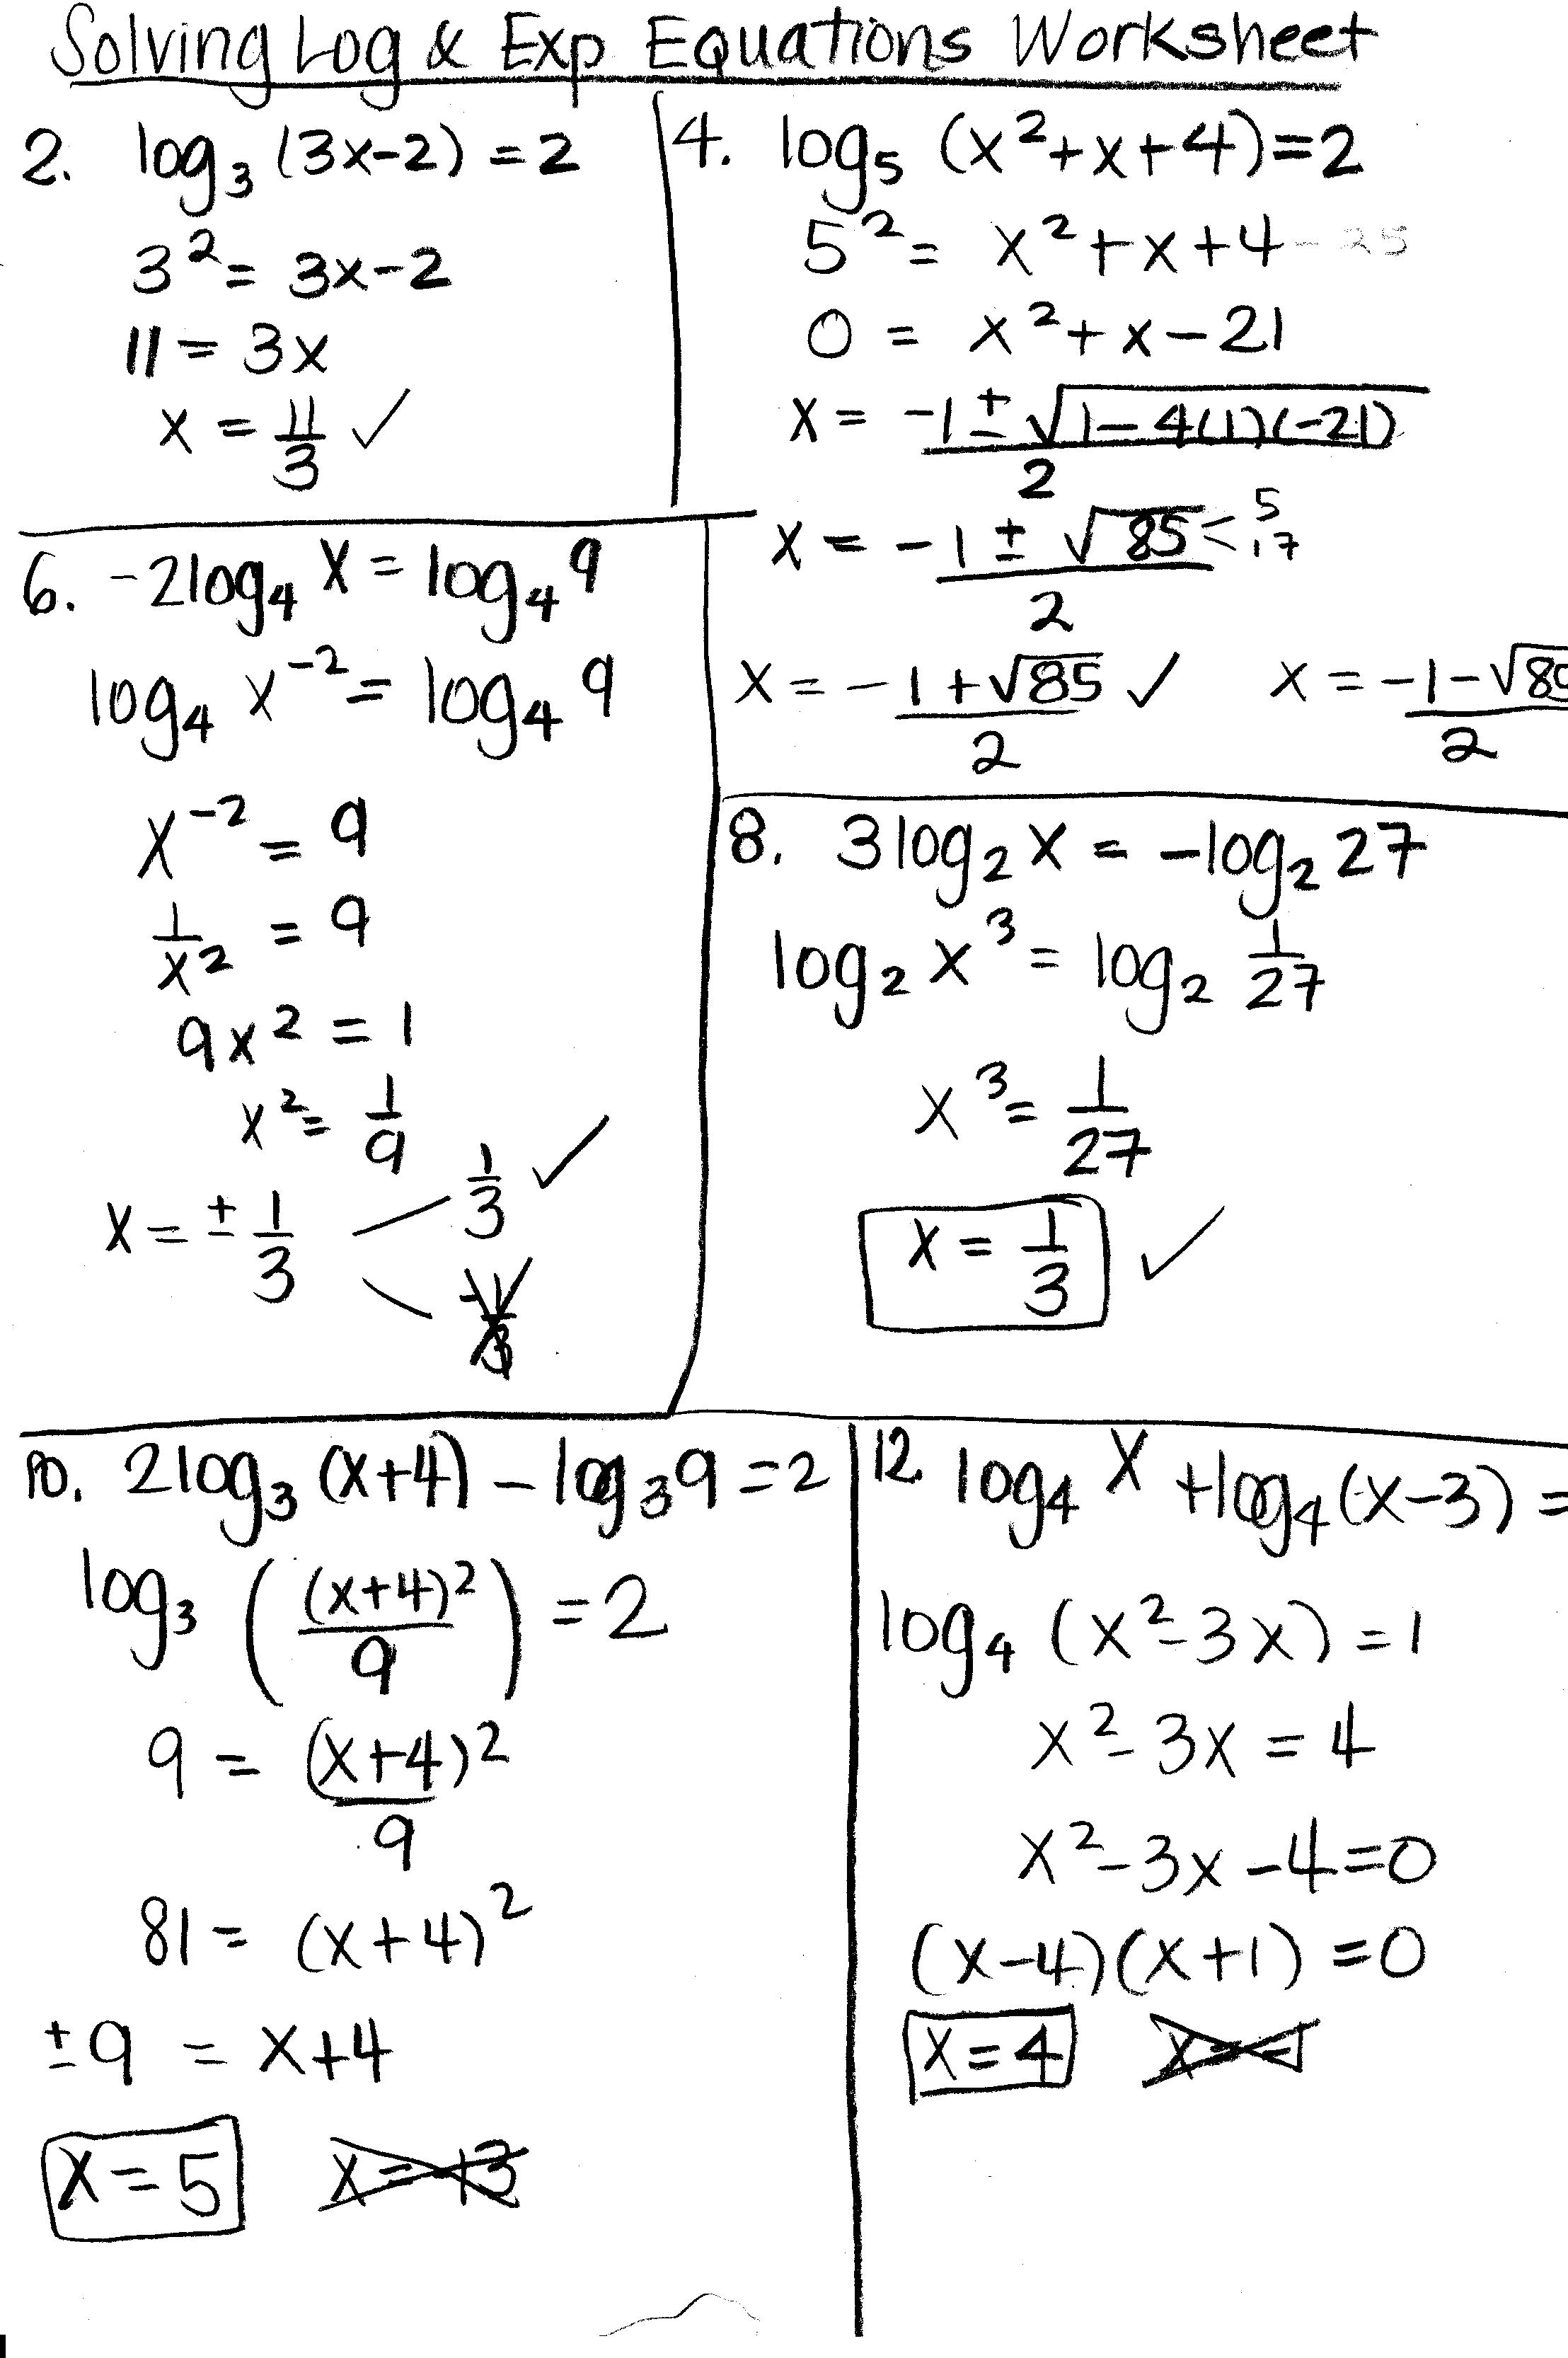 Discover 60+ Precalculus Worksheet On Simplifying Trig Expressions 46